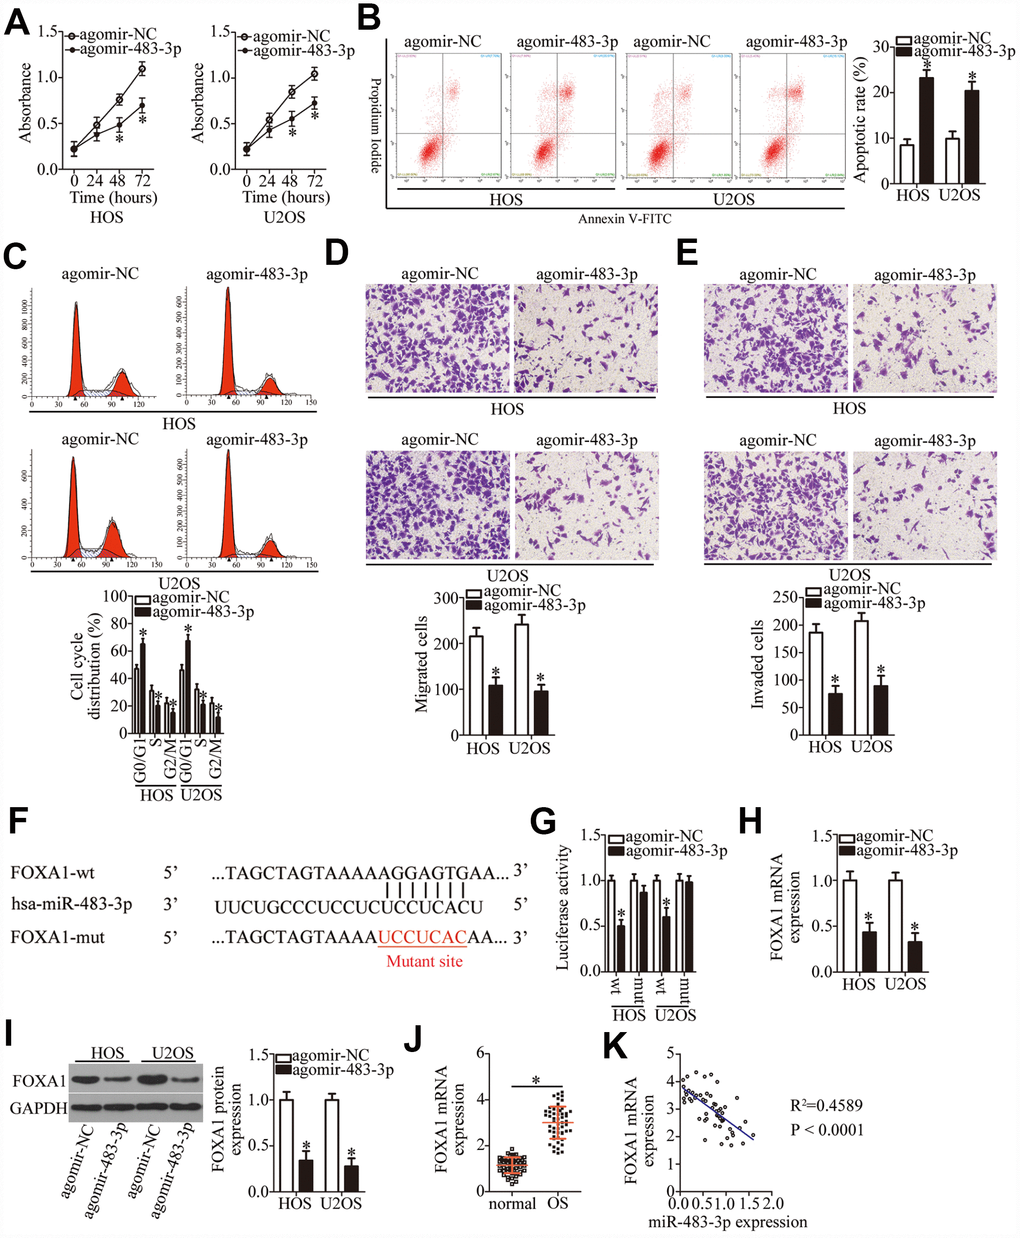 MiR-483-3p directly targets FOXA1 mRNA and plays tumor-suppressive roles in OS cells. HOS and U2OS cells were transfected with either agomir-483-3p or agomir-NC. The transfected cells were studied in functional experiments. (A) The proliferative ability of miR-483-3p–overexpressing HOS and U2OS cells was tested by the CCK-8 assay. *P B, C) The apoptosis rate and cell cycle status of HOS and U2OS cells were determined via flow-cytometric analysis after either agomir-483-3p or agomir-NC transfection. *P D, E) Transwell migration and invasion assays were used to assess the impact of miR-483-3p overexpression on the migration and invasiveness of HOS and U2OS cells. *P F) The predicted miR-483-3p–binding site in the 3′-UTR of the FOXA1 mRNA. The mutated binding sequence is also shown. (G) Either FOXA1-wt or FOXA1-mut along with either agomir-483-3p or agomir-NC was introduced into HOS and U2OS cells. After 48 h of transfection, firefly luciferase activity was measured and normalized to that of Renilla luciferase. *P H, I) The mRNA and protein levels of FOXA1 in HOS and U2OS cells that were transfected with either agomir-483-3p or agomir-NC were respectively examined by RT-qPCR and western blotting. *P J) The expression of FOXA1 mRNA in the 53 pairs of OS tissue samples and the adjacent normal tissues was tested via RT-qPCR analysis. *P K) The expression correlation between miR-483-3p and FOXA1 mRNA in the 53 OS tissues was analyzed through Spearman’s correlation analysis. R2 = 0.4589, P 